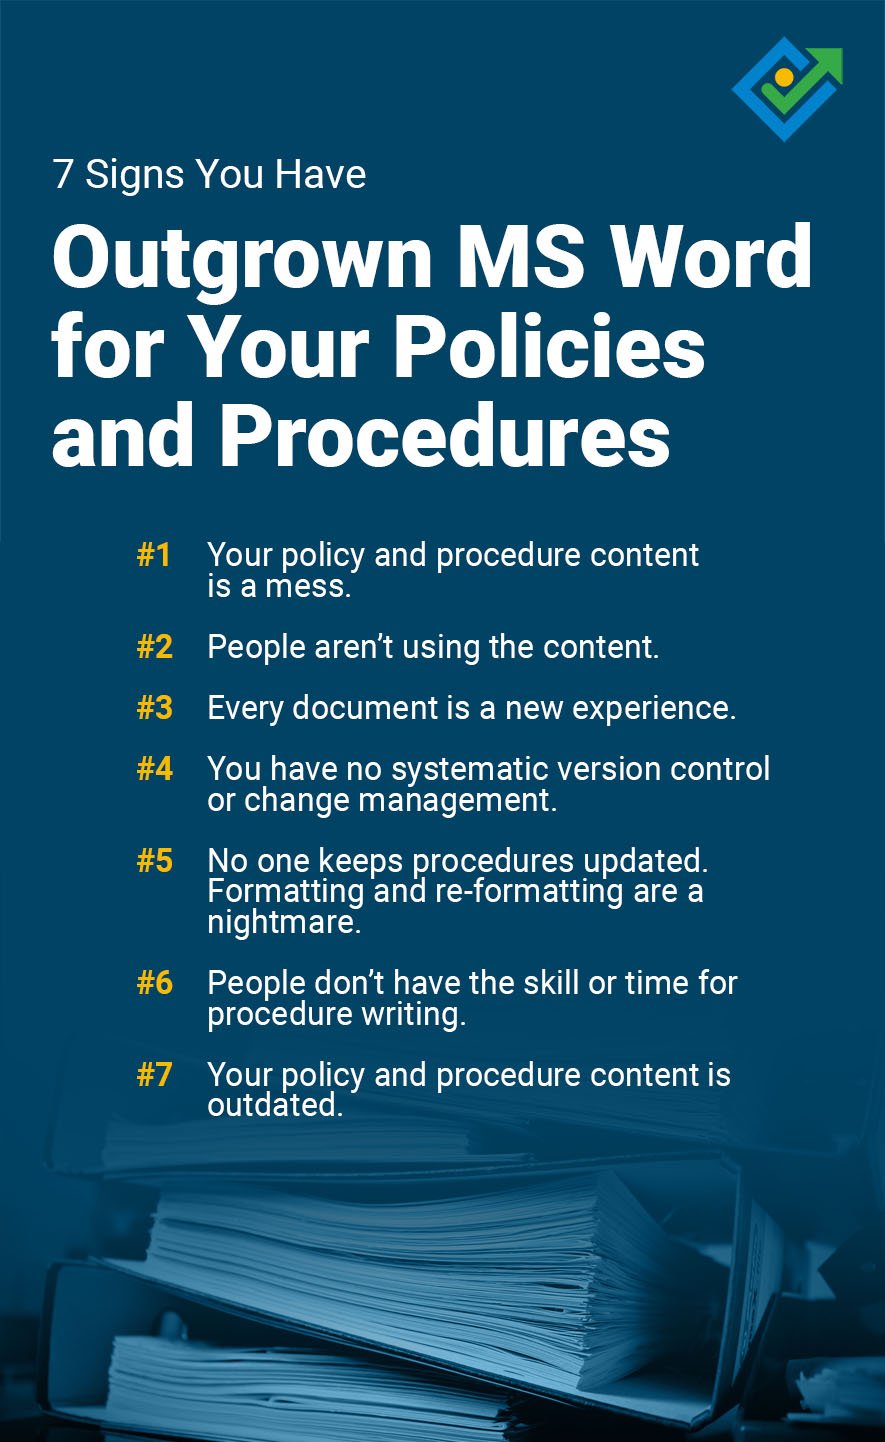 7 Signs You Have Outgrown MSWord for Policies and Procedures blog graphic